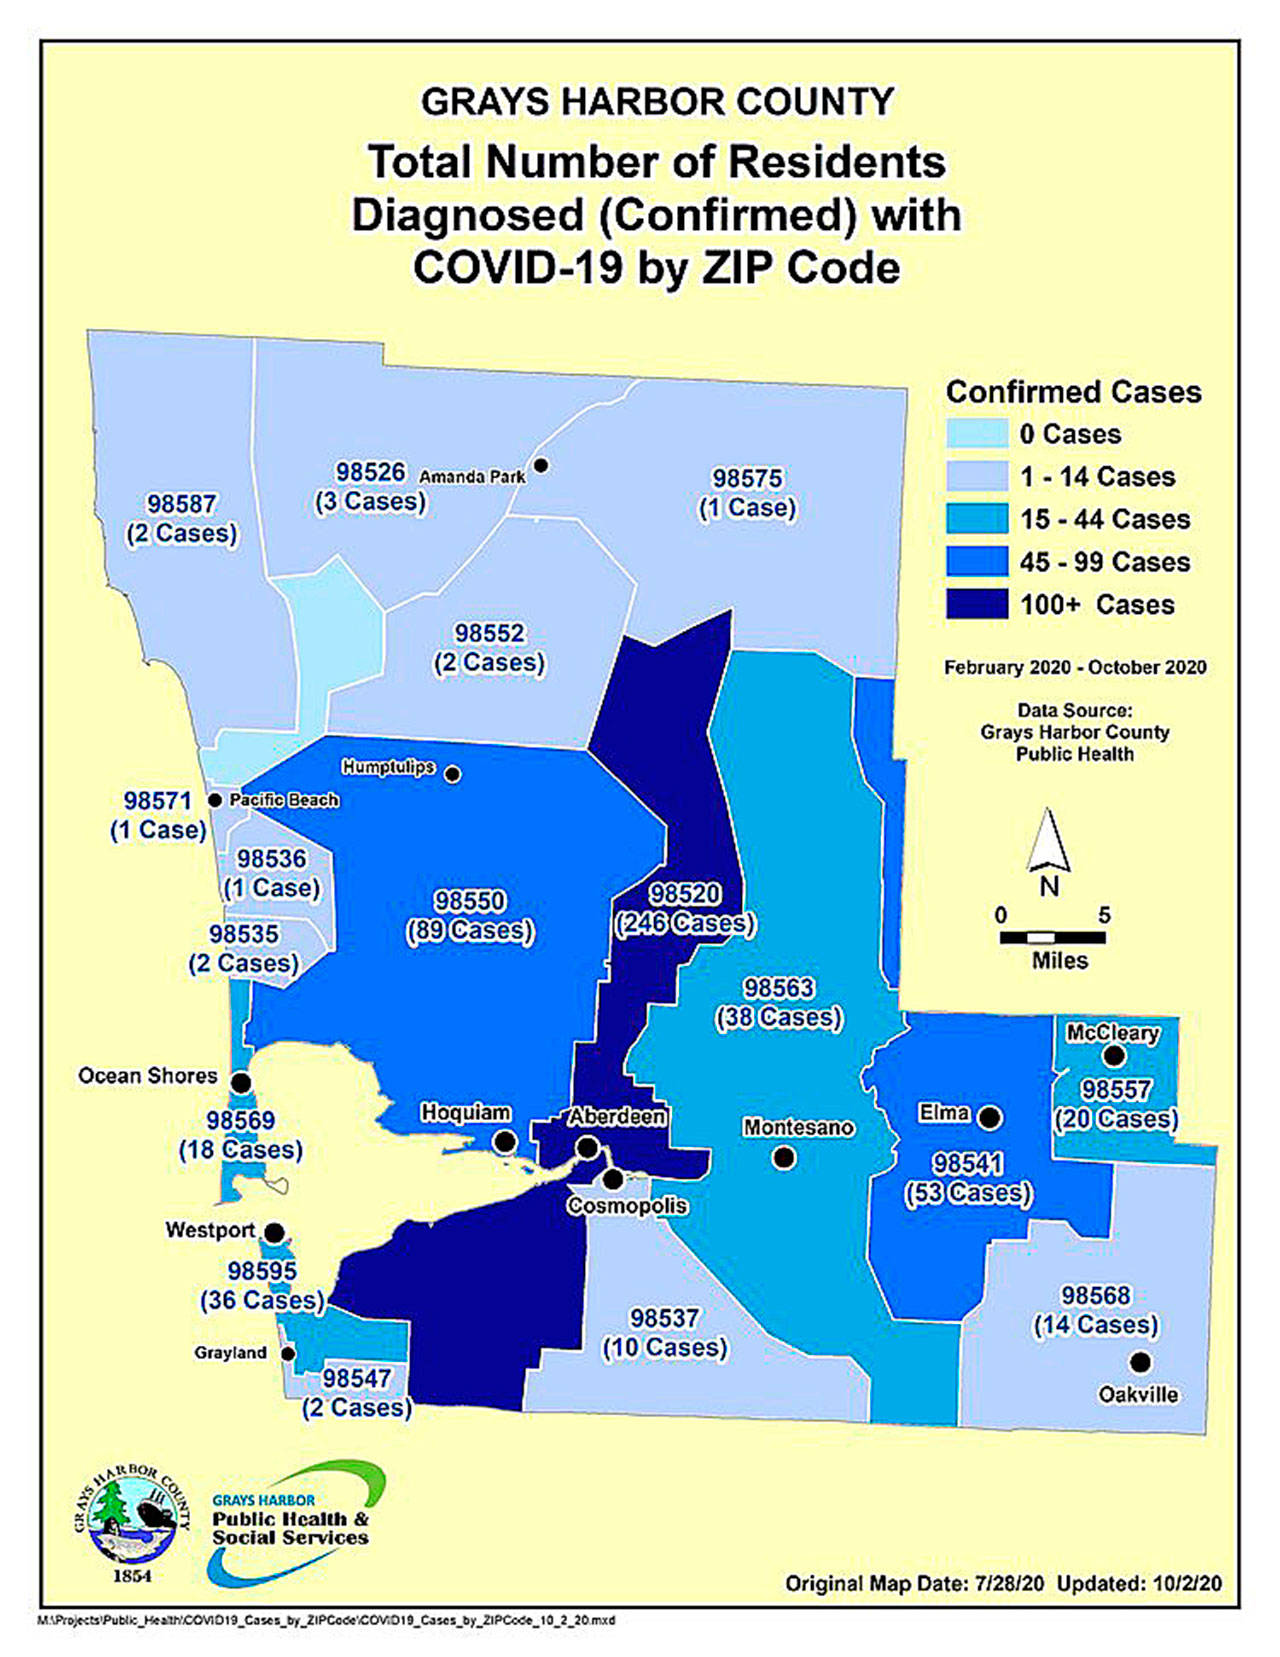 COVID-19 cases by zip code, updated by Grays Harbor Public Health Oct. 2.